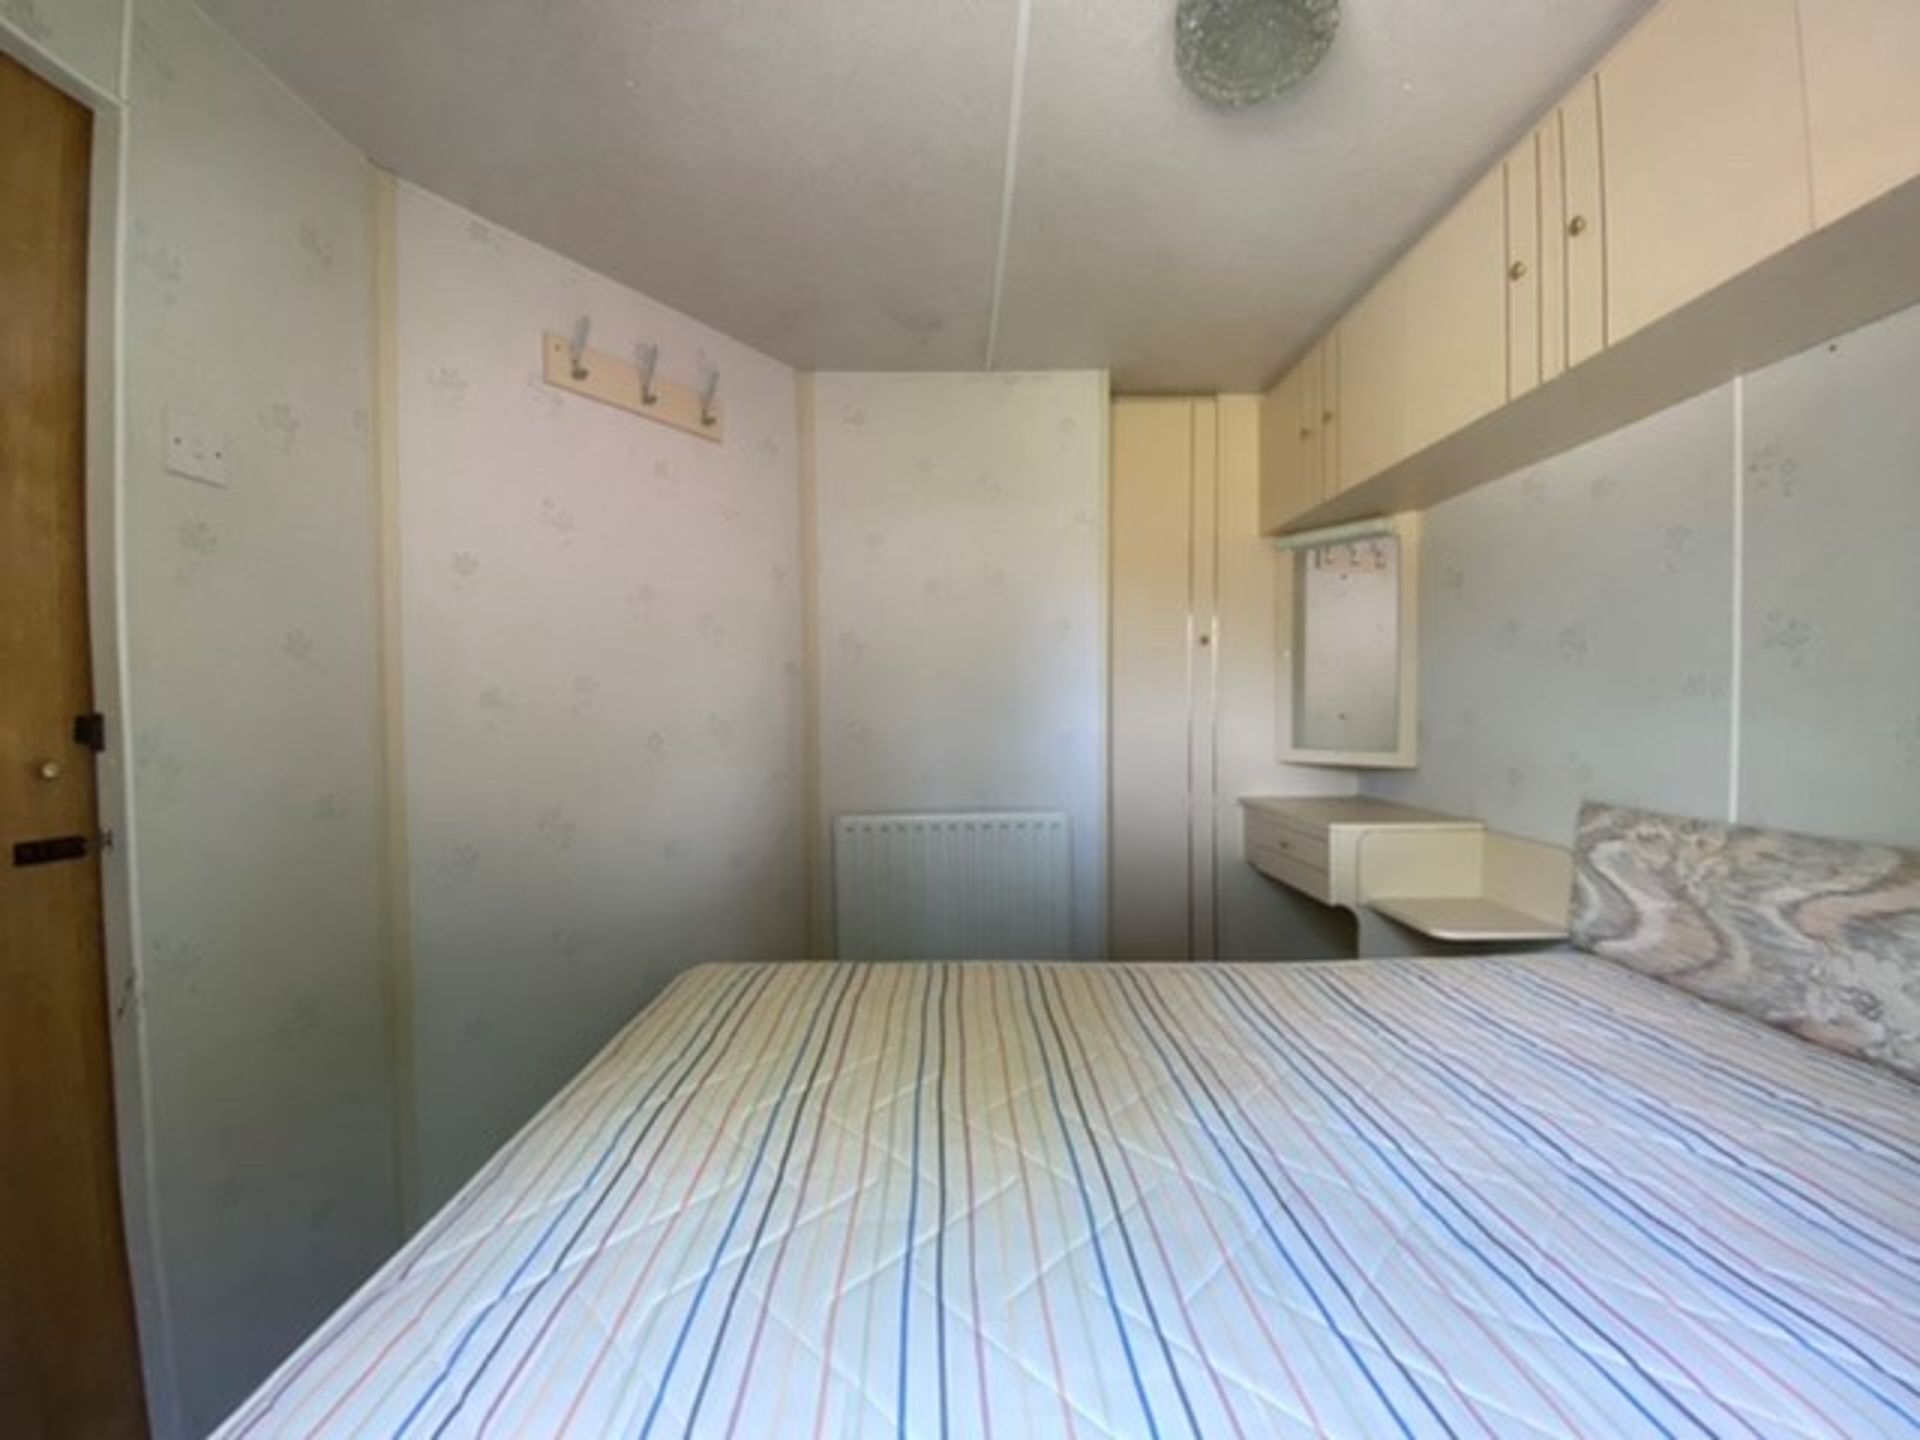 30x 10 GALAXY 2 BEDROOM STATIC CARAVAN WITH NEW GAS FIRED CENTRAL HEATING - Image 8 of 9